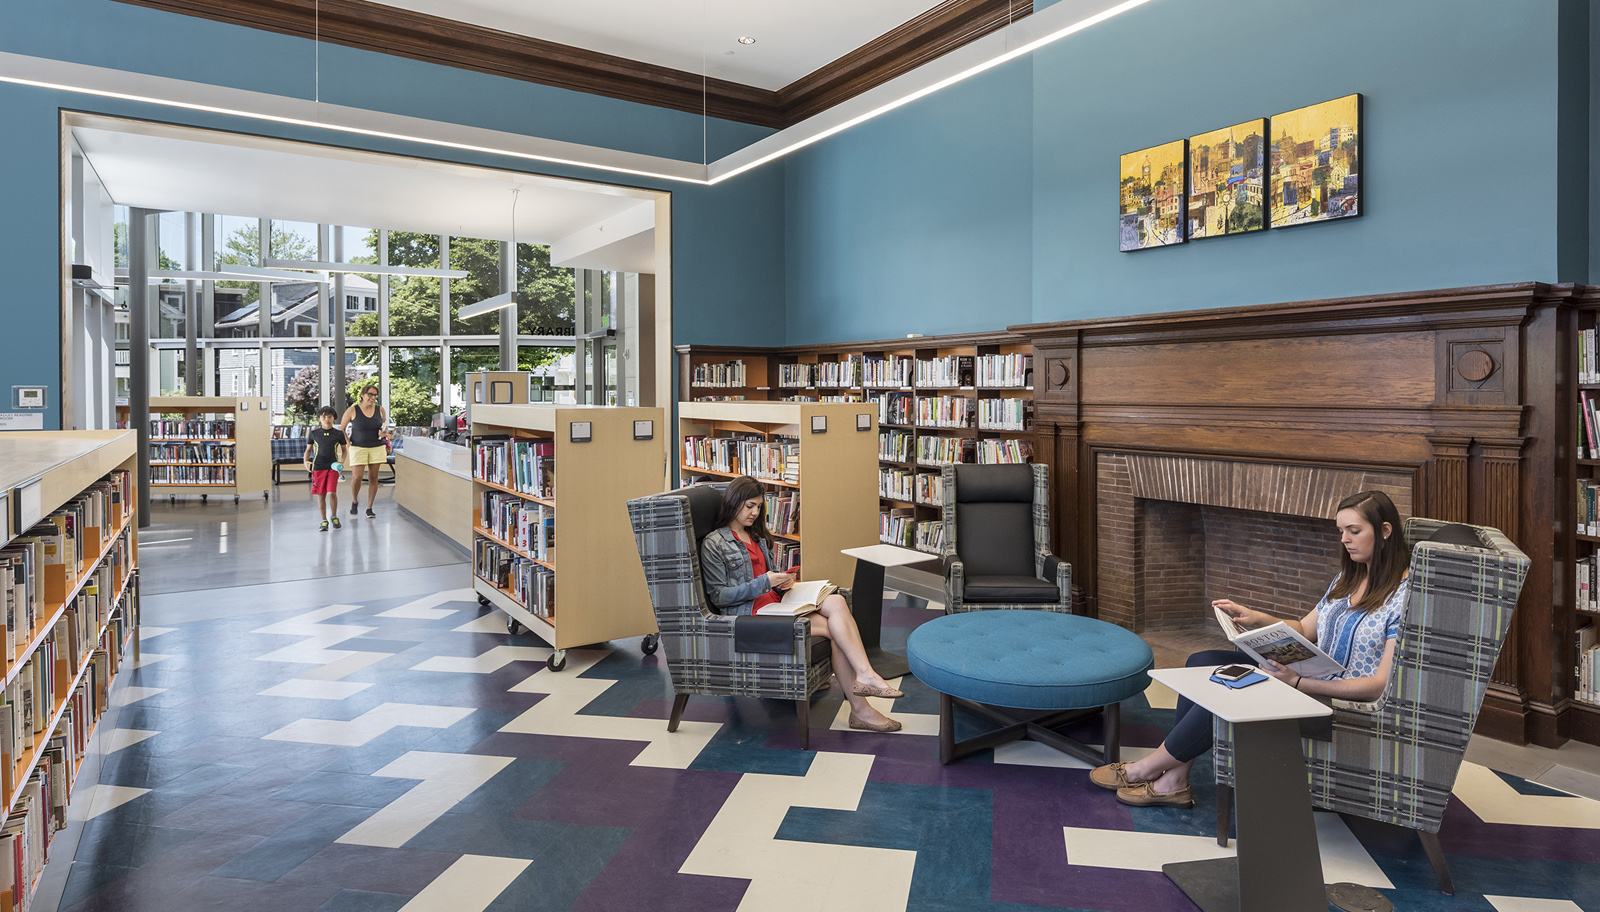 An image of the Boston Public library Jamaica Plain branch